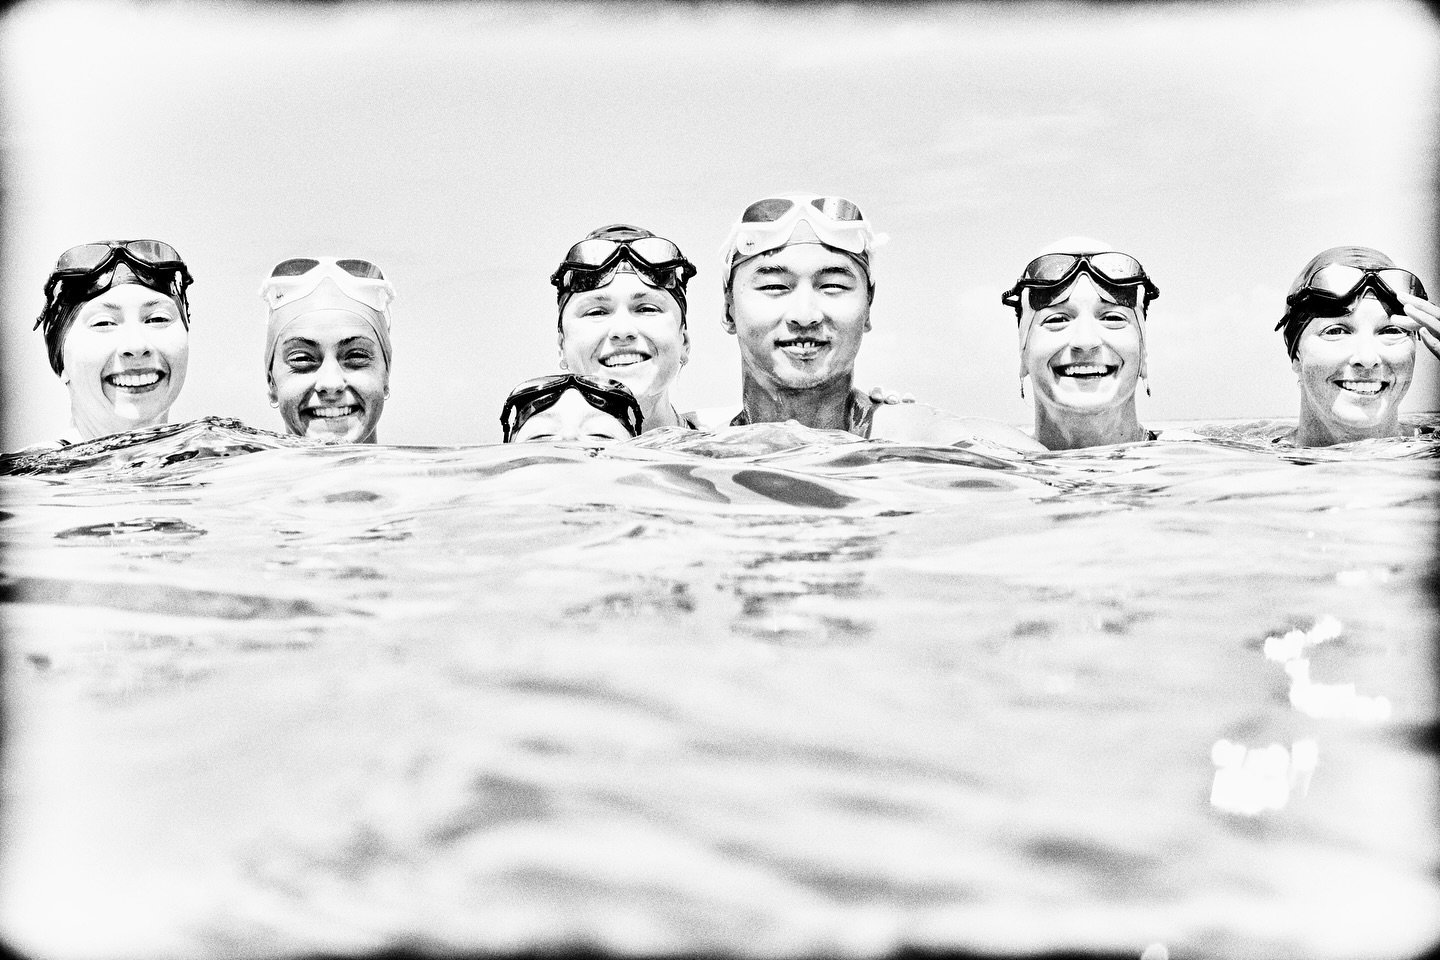 Team @hxcsport ready for a swim. 

📷 Jeff Hornbaker @jeffthirdeye 

Experience the Ocean with Third Eye Gear at thirdeyeworld.com or go to the link in profile.

#ocean #openocean #swimming #swimmers #openoceanswim #swimgoggles #thirdeyegoggles #gerr